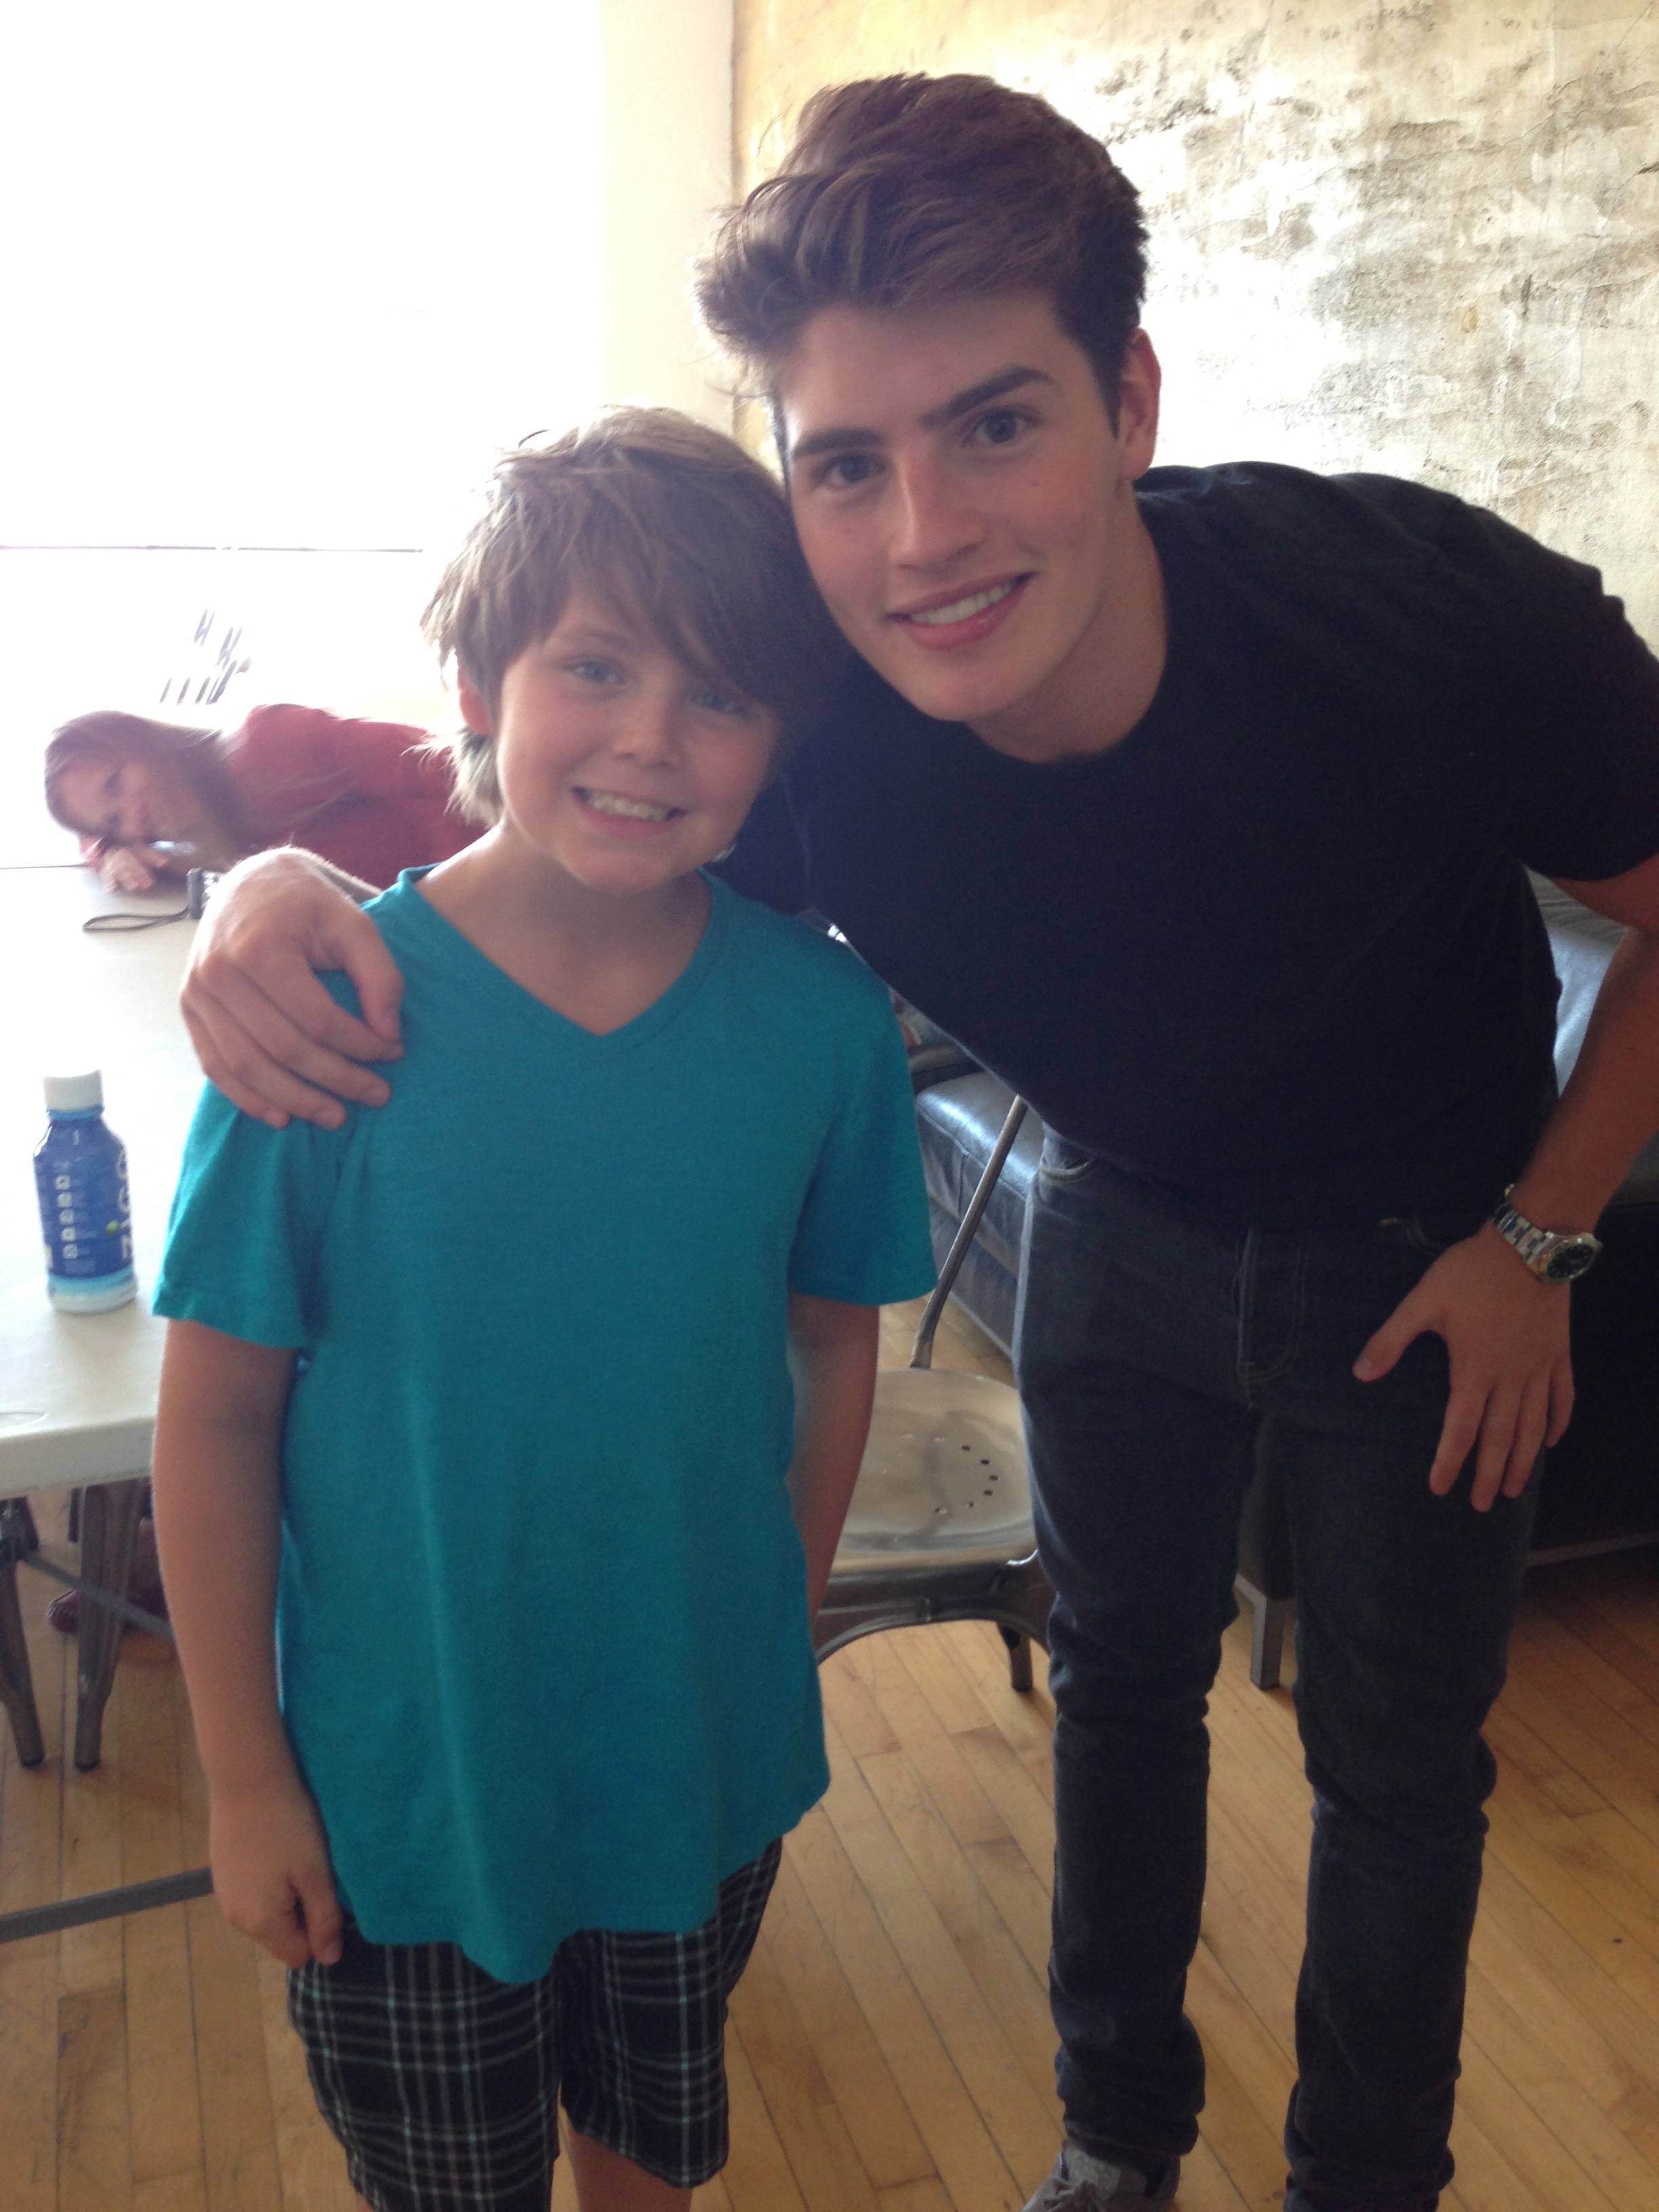 Hanging with my big brother Gregg Sulkin